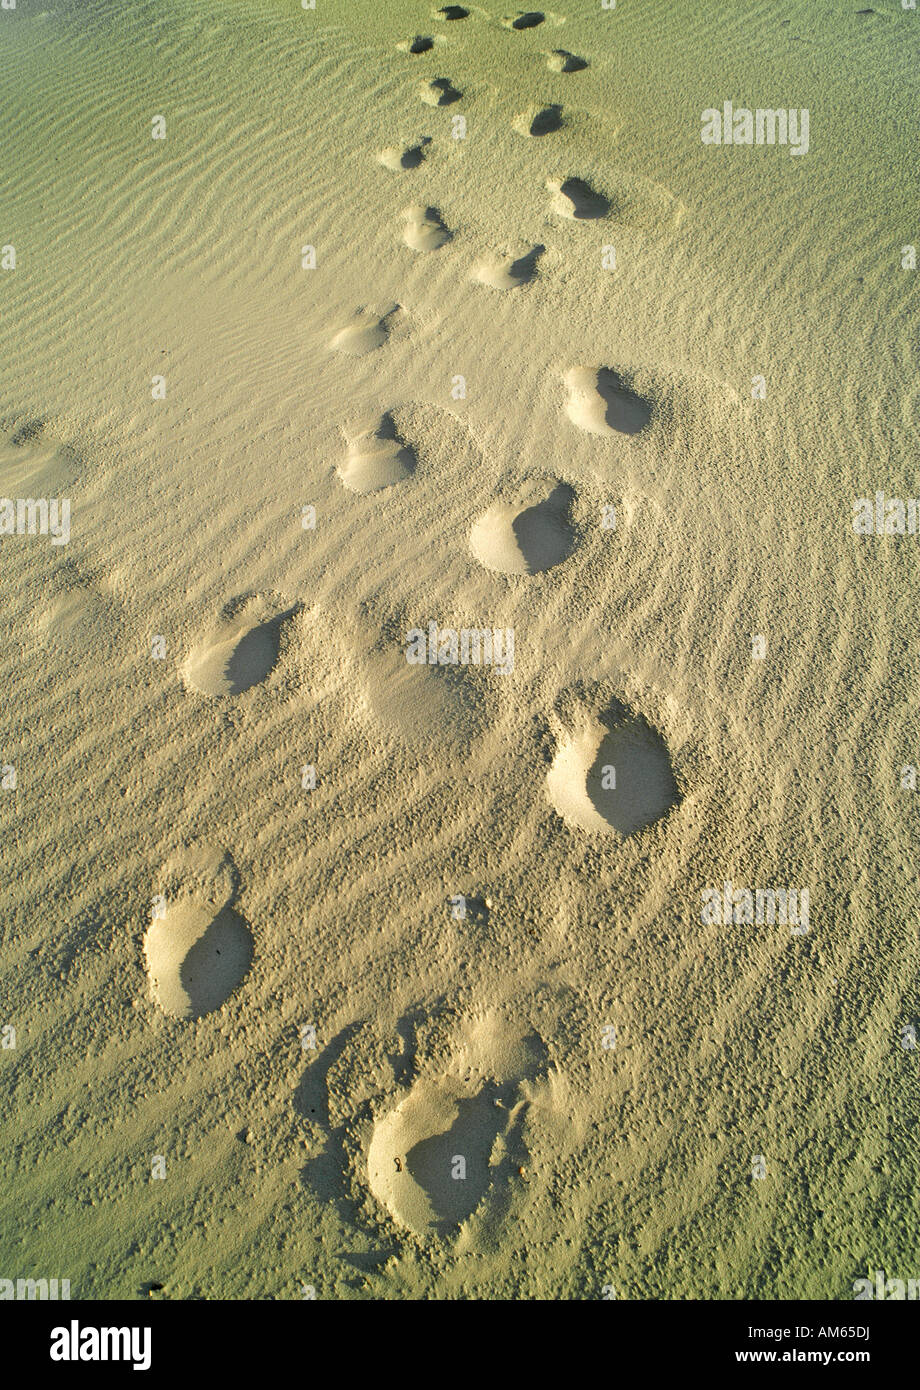 Foot prints in sand, Juist, Lower Saxony, Germany Stock Photo